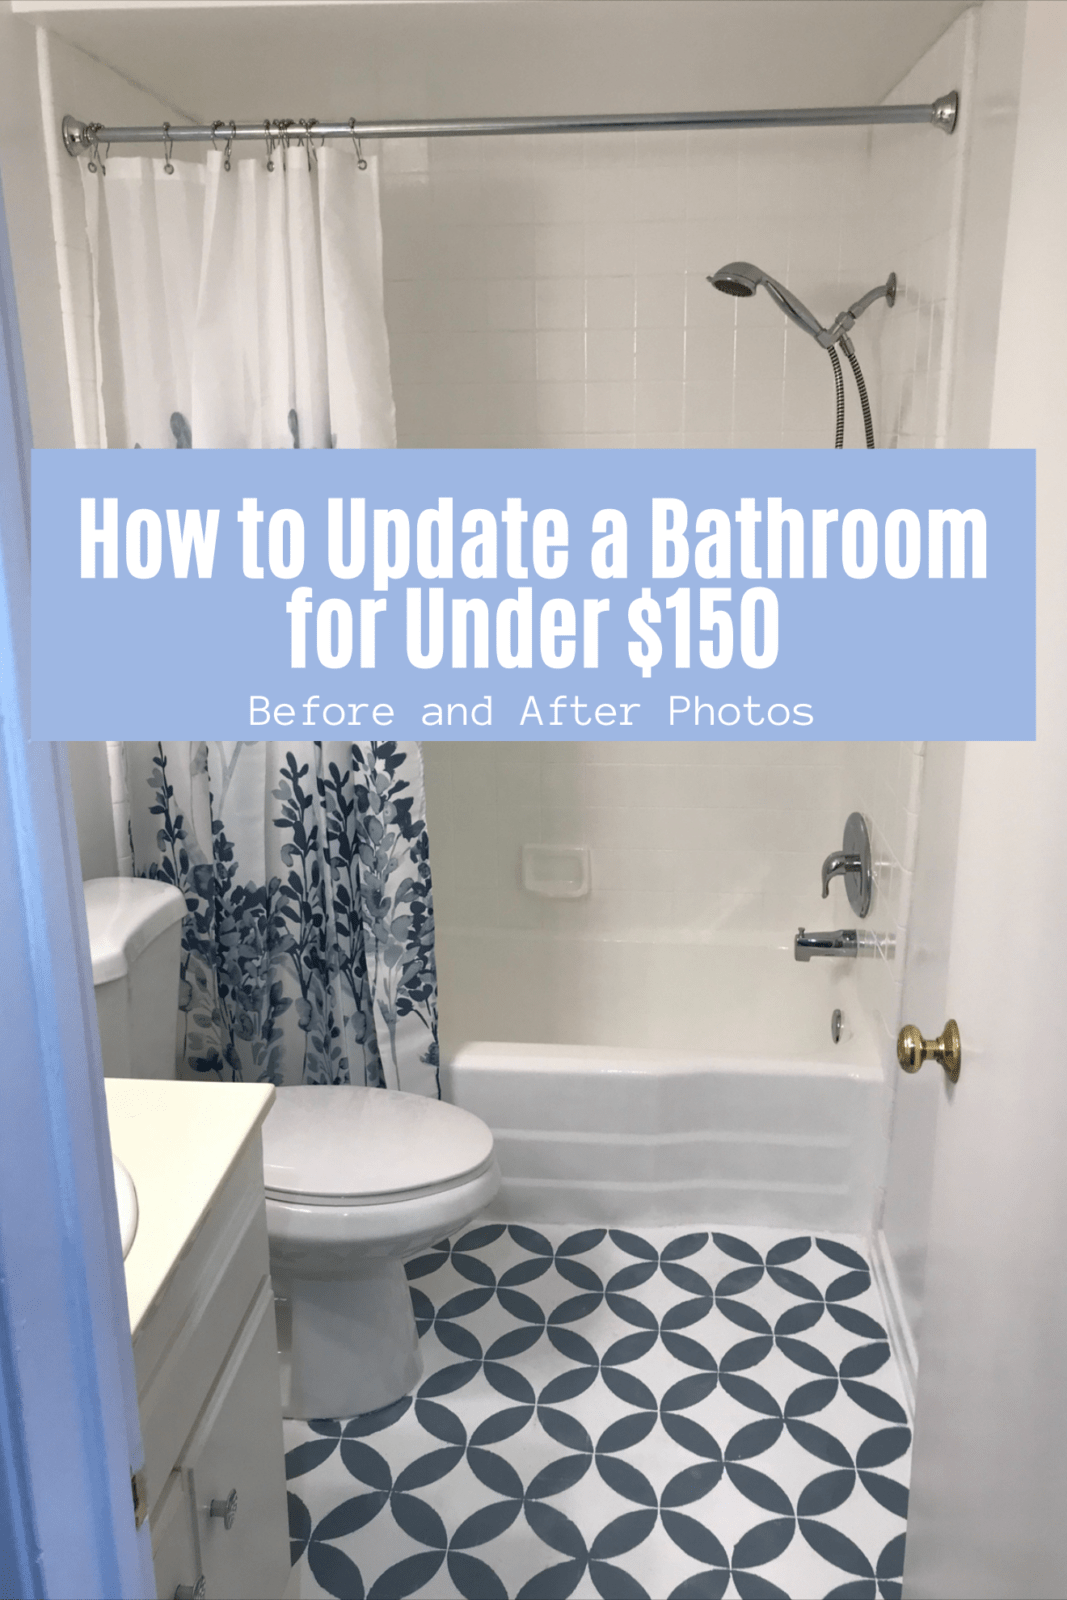 How to Update a Bathroom for Under $150